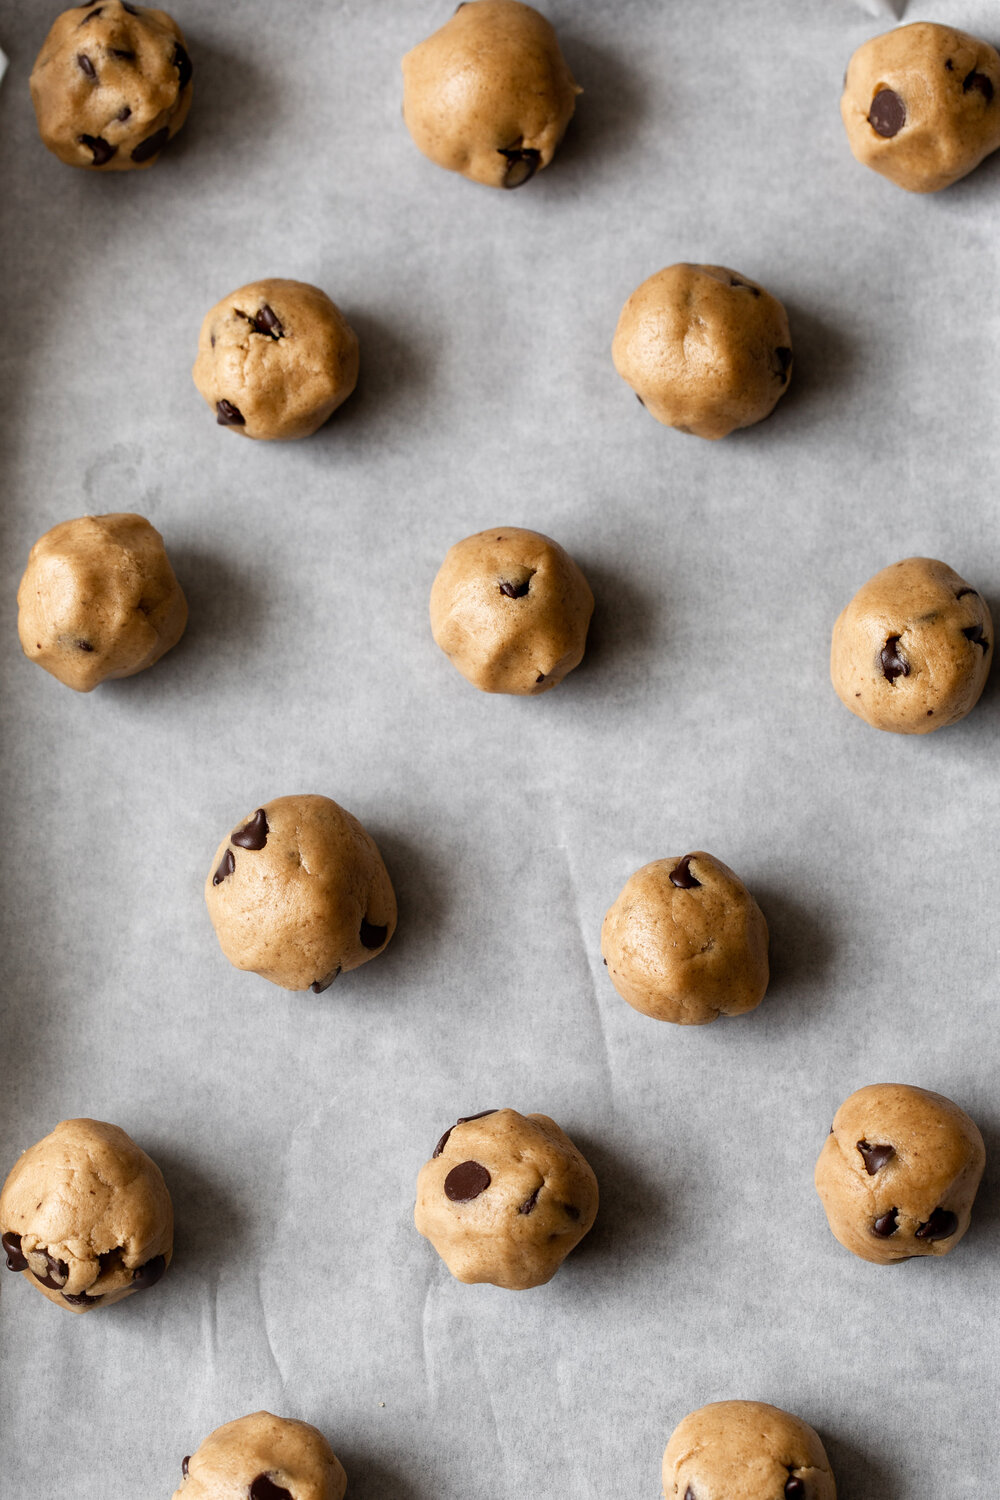 Chocolate Chip Cookie dough on baking sheet